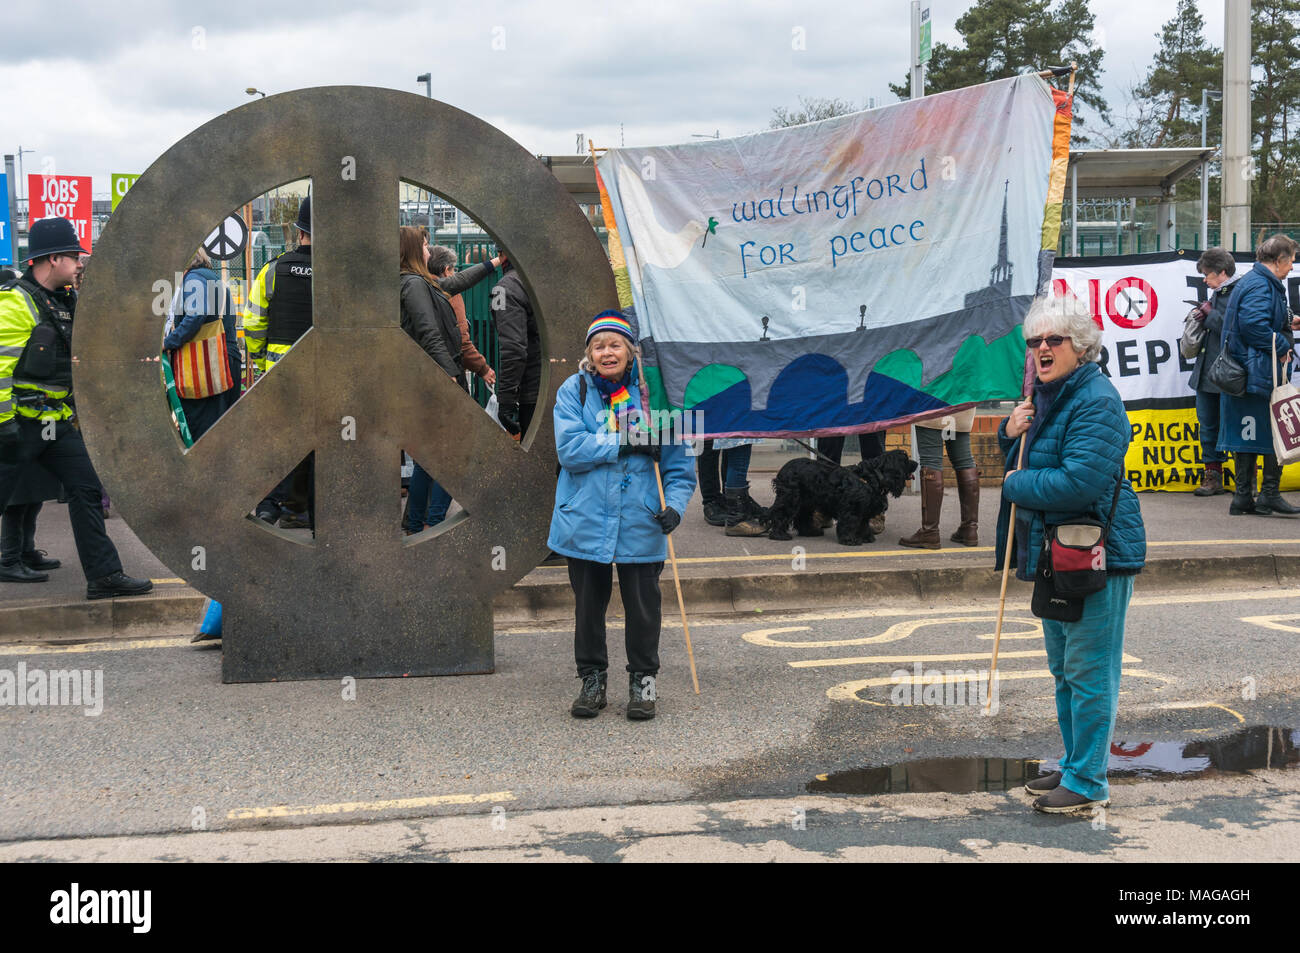 Aldermaston, UK. 1st Apr, 2018. CND erected its giant  CND symbol installation at the main gate of AWE Aldermaston to celebrate the 60th anniversary of the first Aldermaston march which mobilised thousands against the Bomb and shaped radical protest for generations. Their protest outside the Atomic Weapons Establishment included a giant, iconic peace symbol, speeches, including by some of those on the original march, singing and drumming and celebrated the UN treaty banning nuclear weapons. Credit: Peter Marshall/Alamy Live News Stock Photo